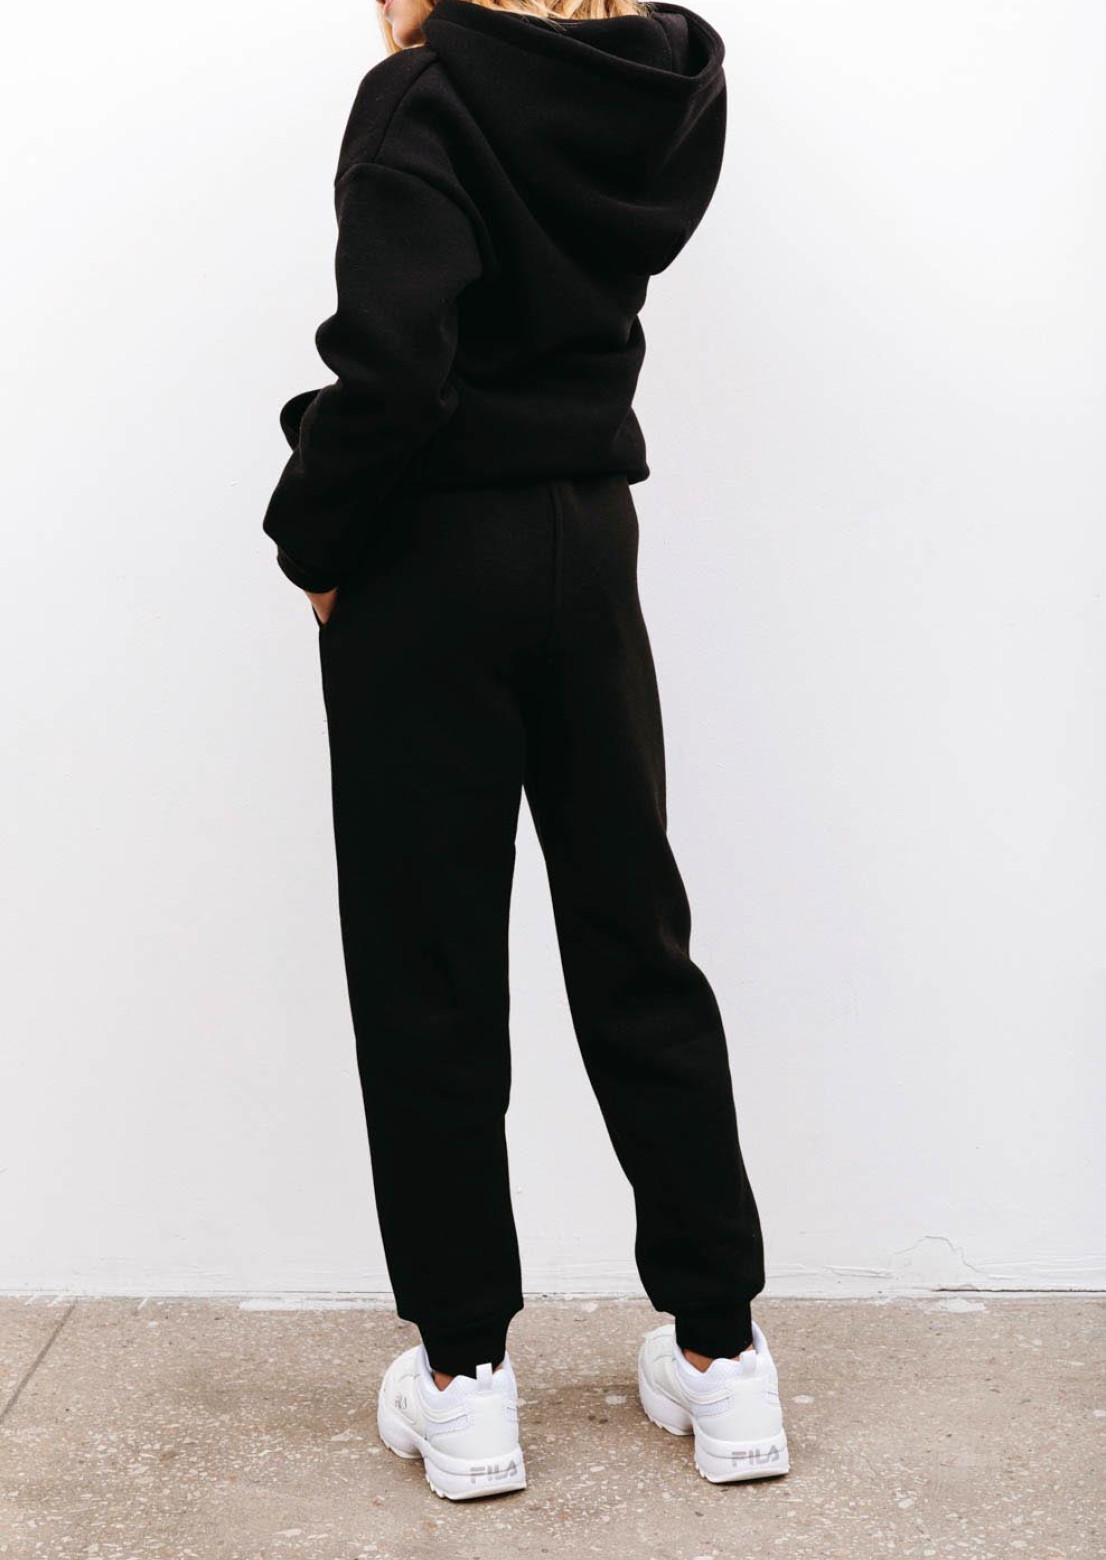 Black color kids footer trousers